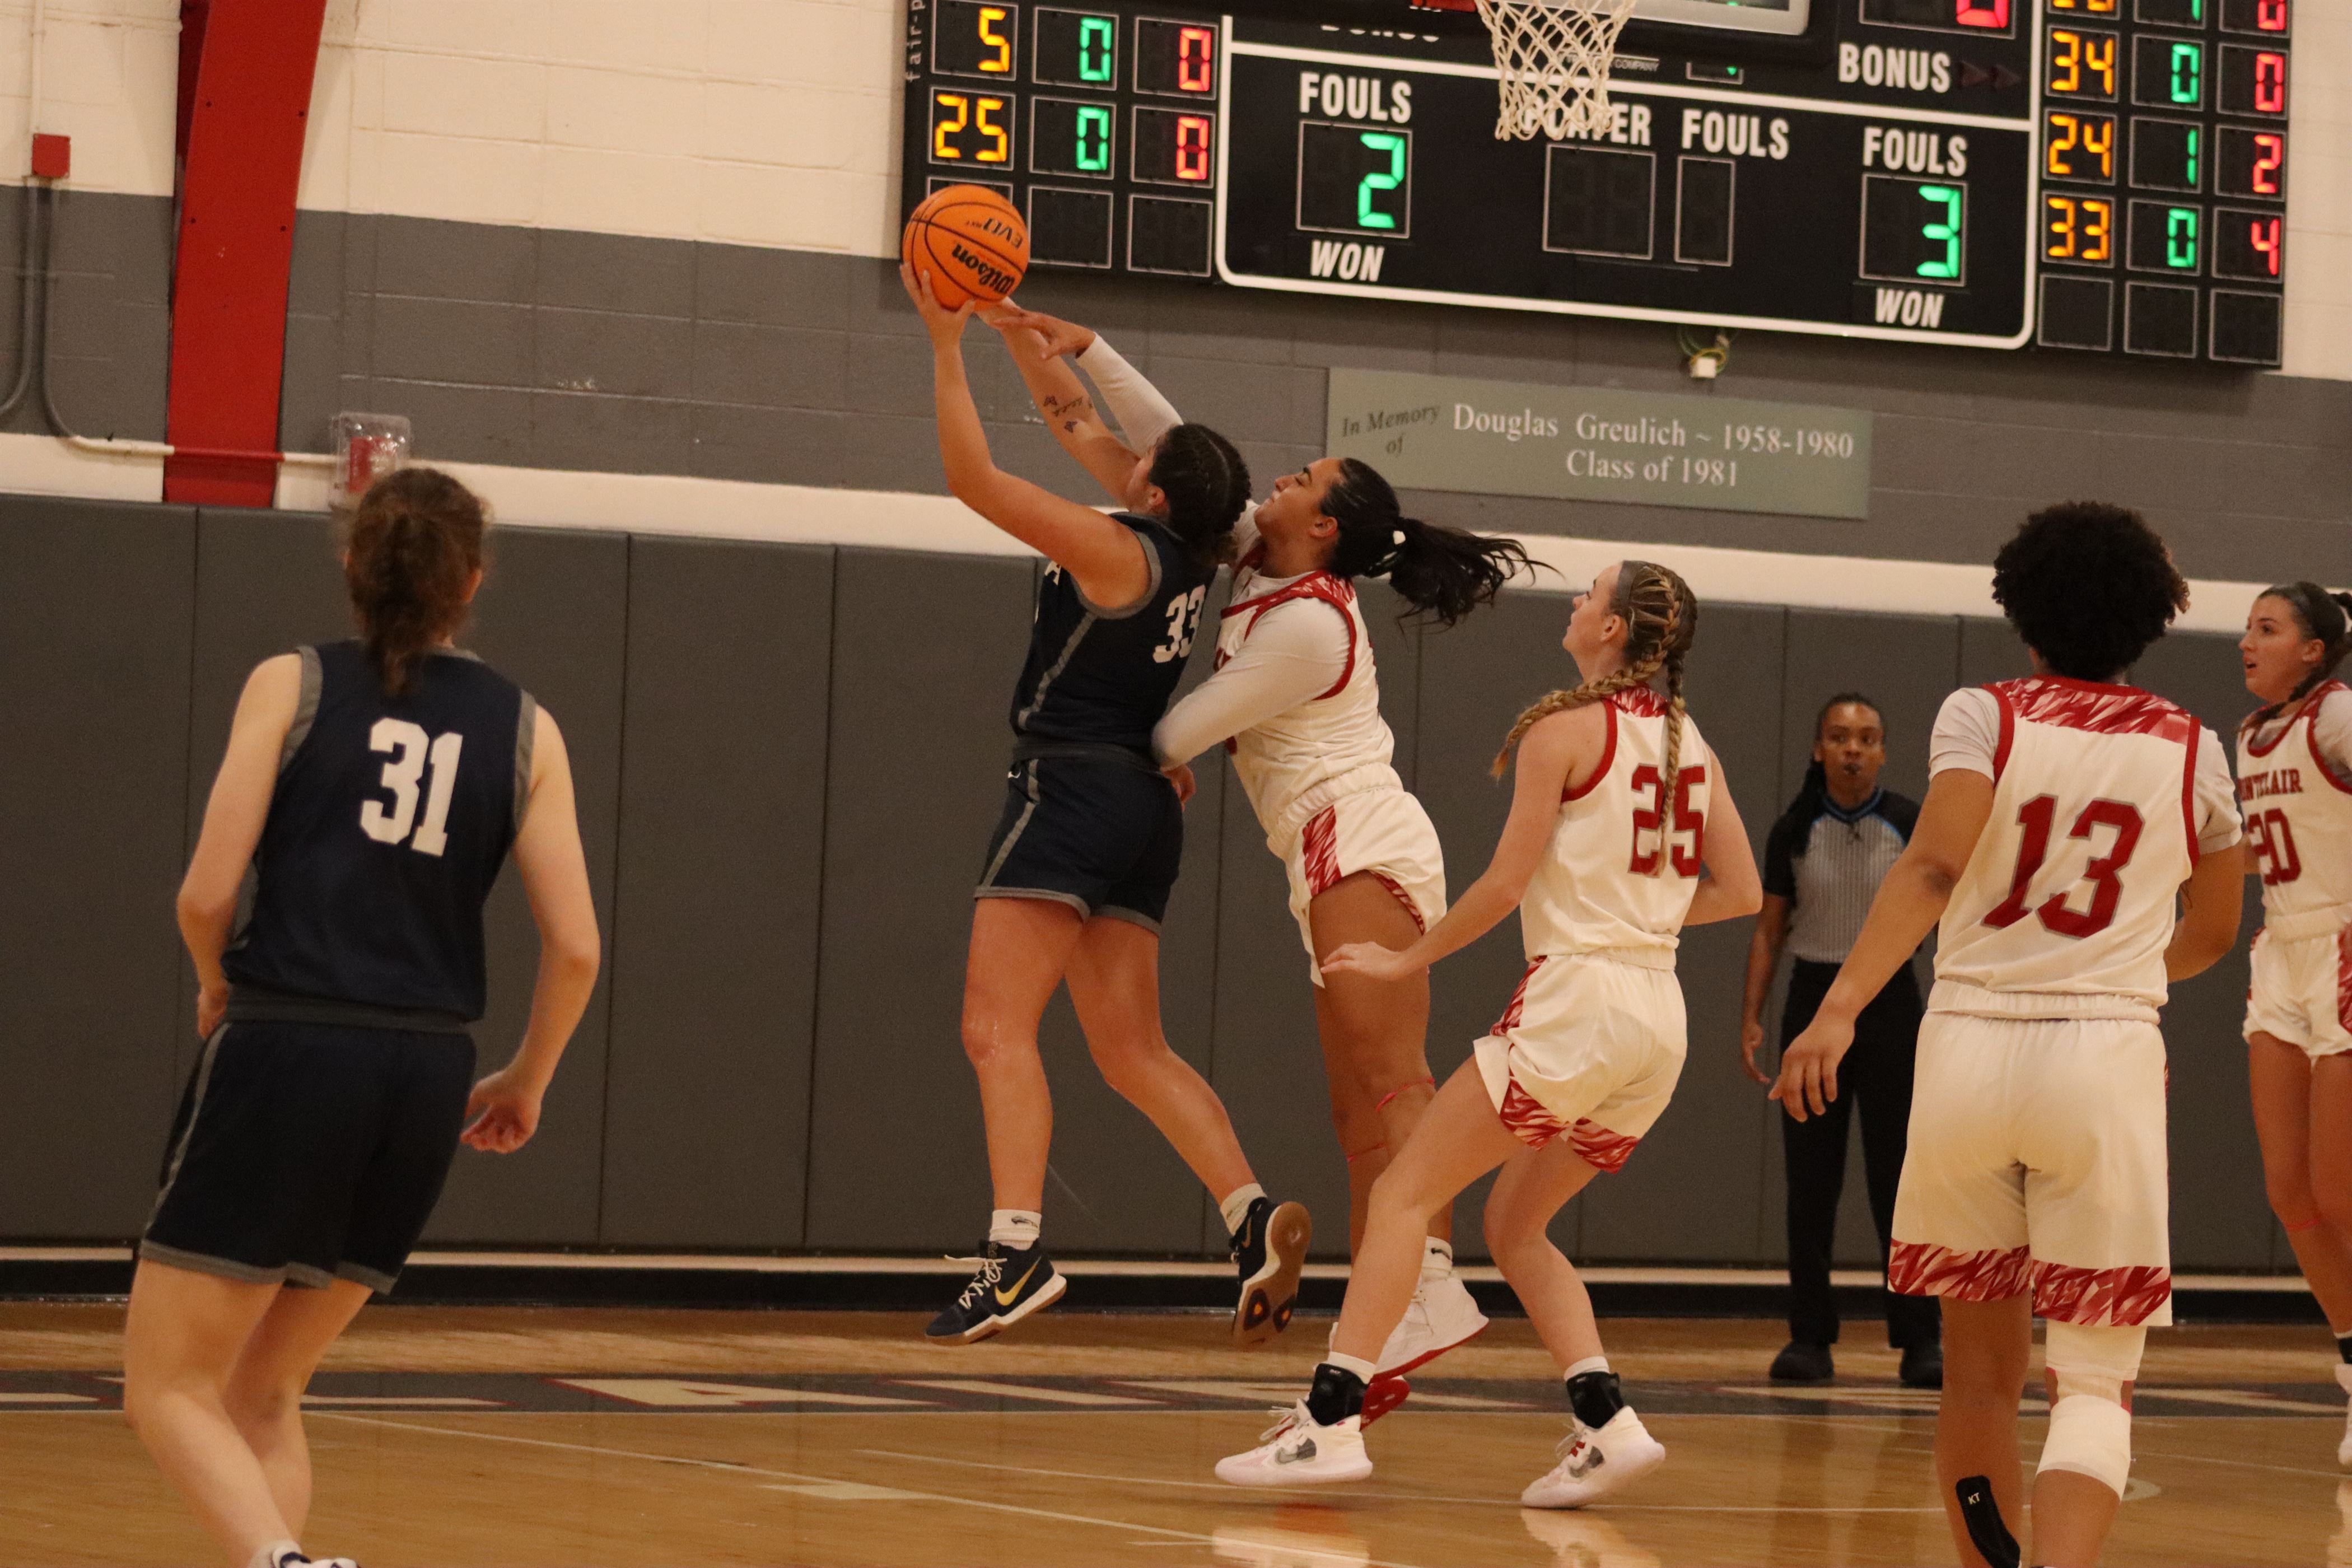 Olivia Vero goes for a block from behind the Ithaca player. Dan Dreisbach | The Montclarion